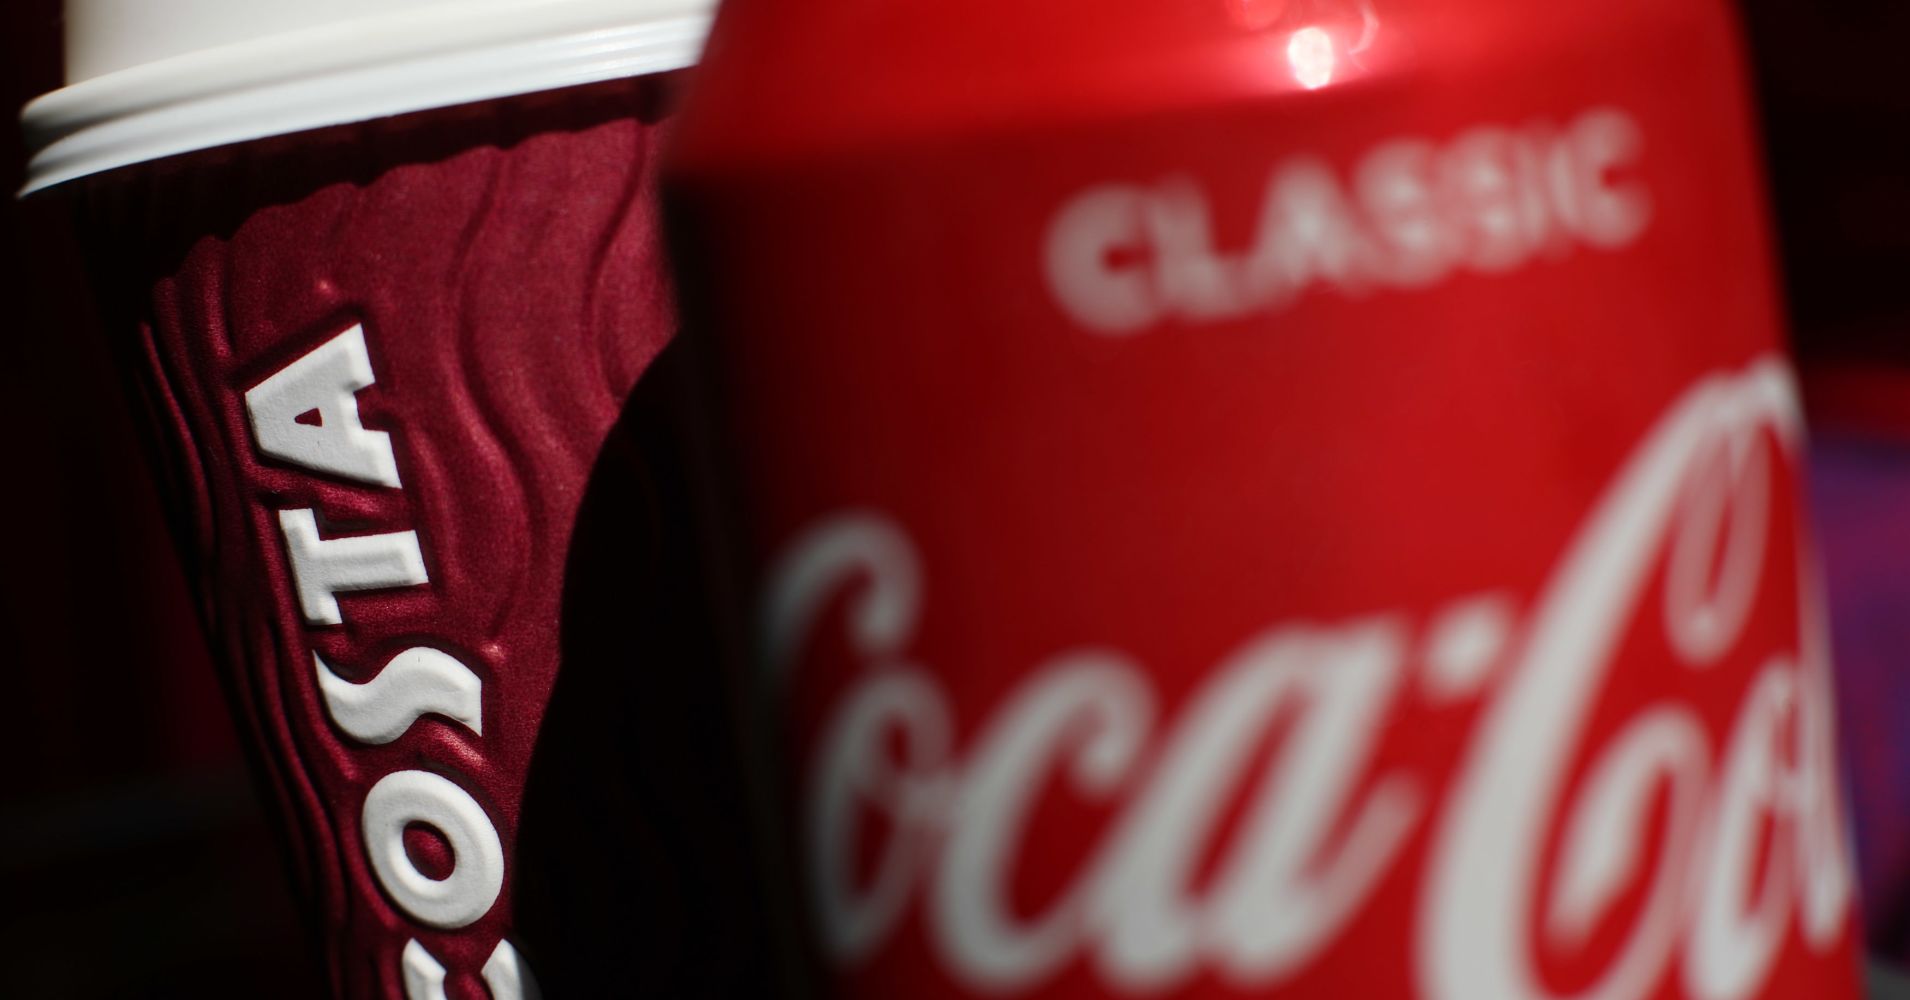 A can of Coca-Cola next to a cup of Costa coffee.